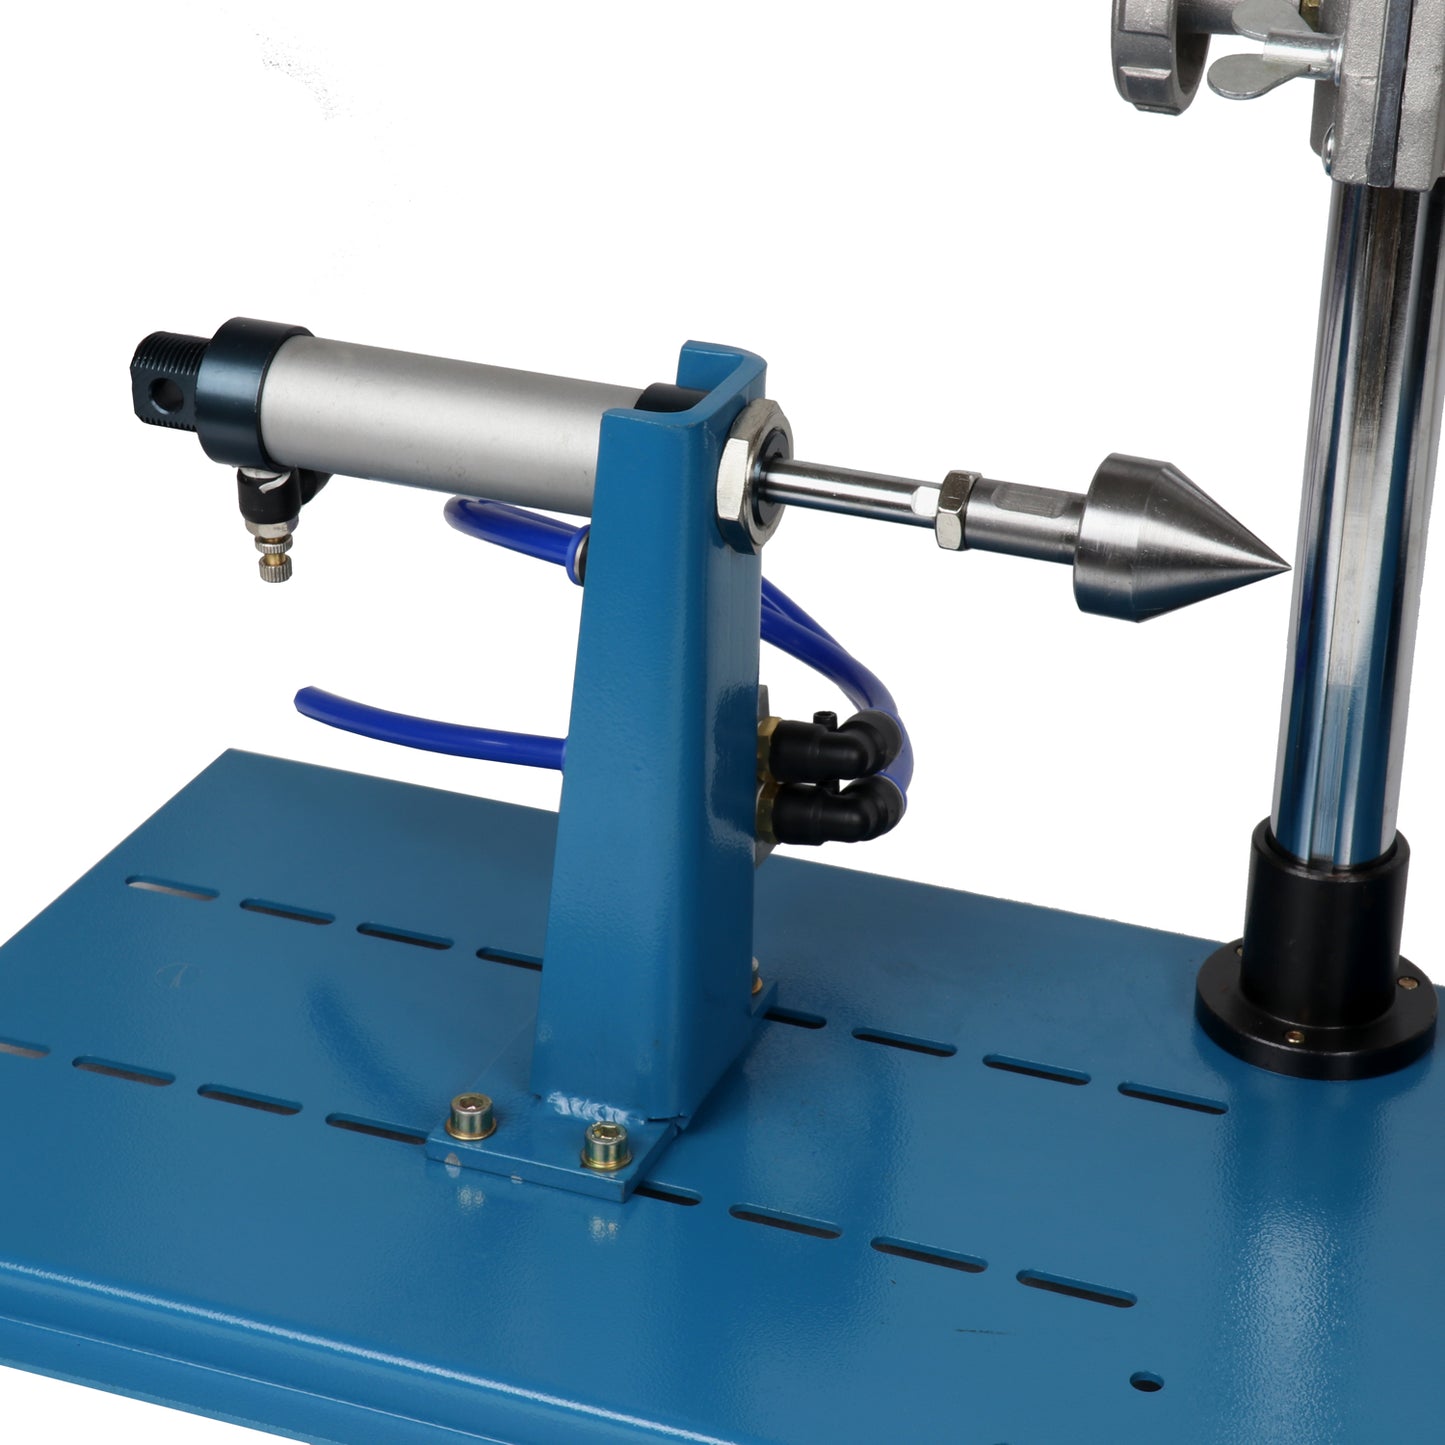 BY-10 Welding Positioner Machine with Welding Touch Holder and Pneumatic Gun